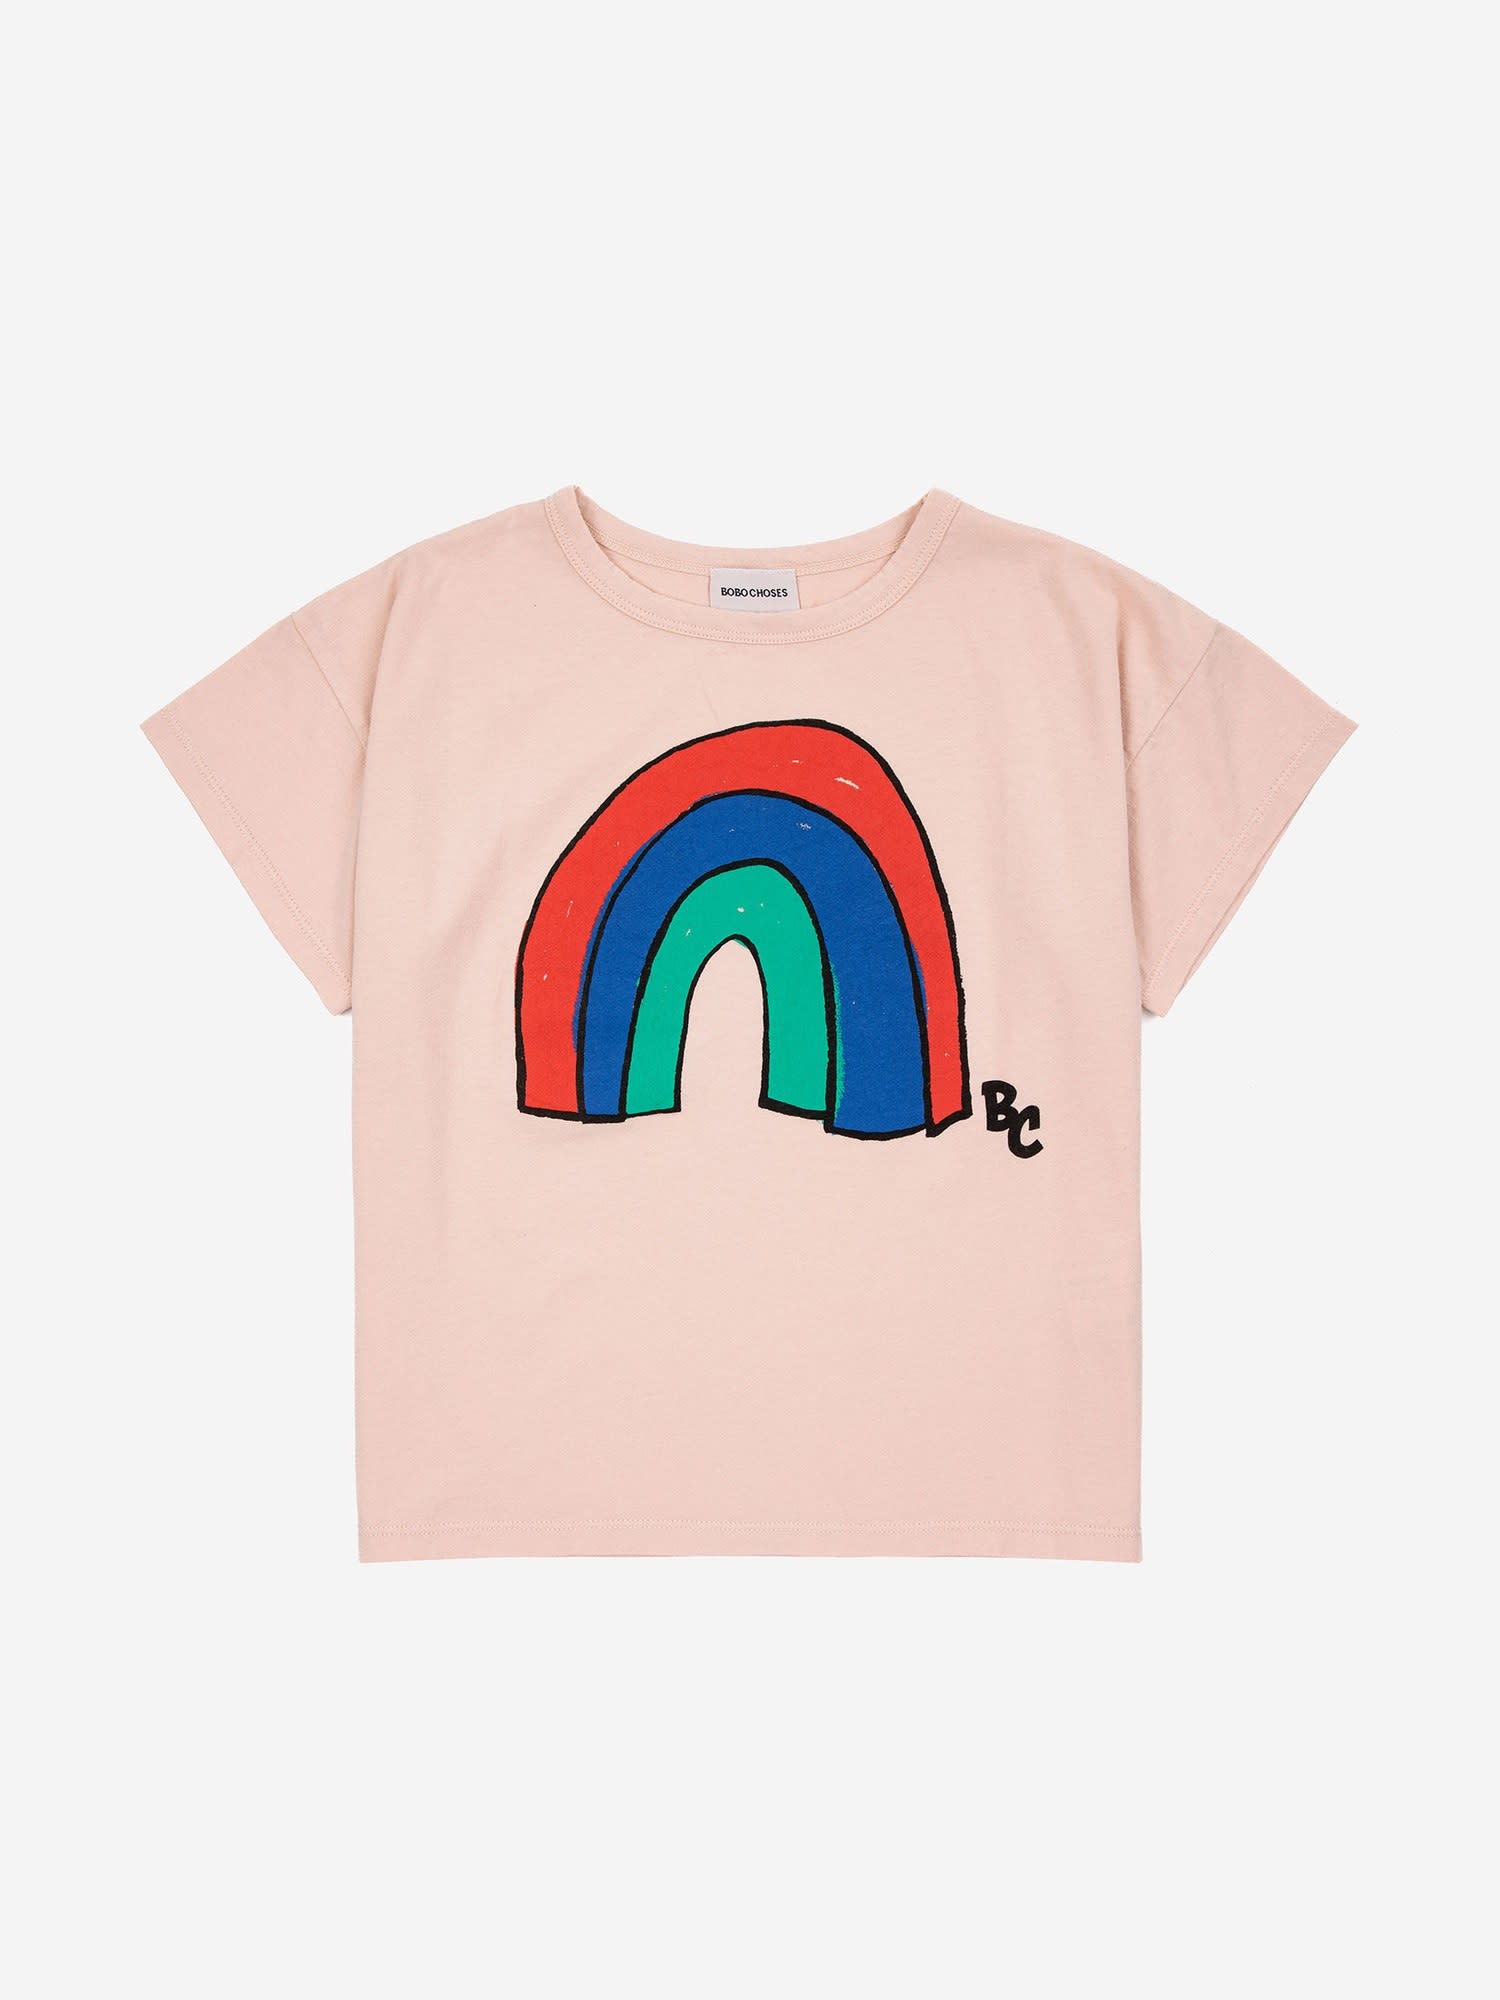 Bobo Choses Pink T-shirt For Kids With Rainbow Print